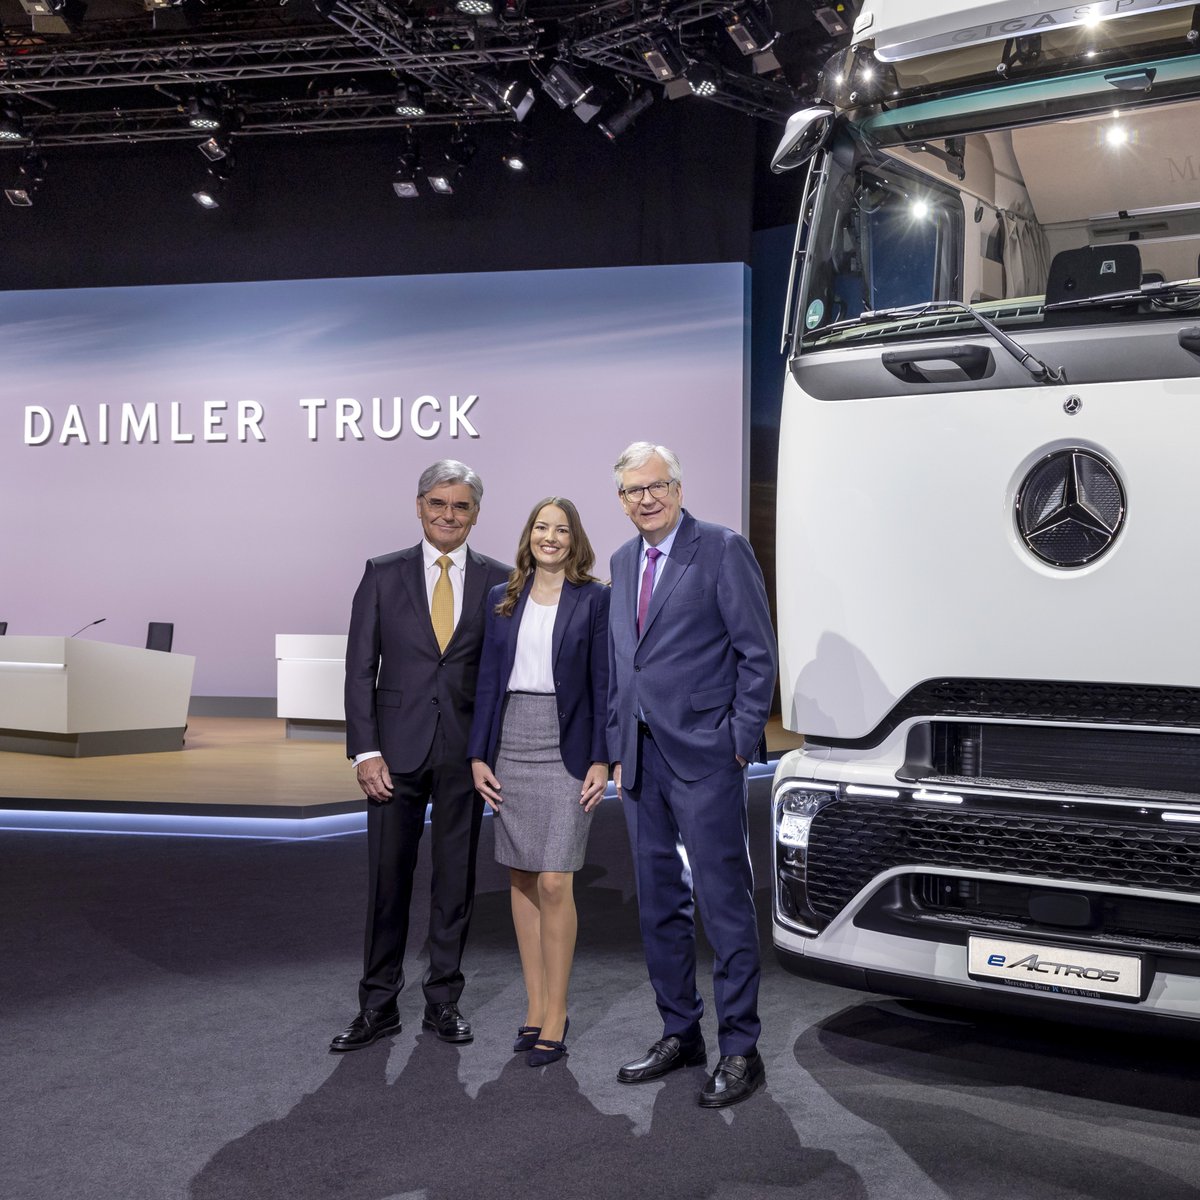 After a record year: Daimler Truck reaffirms strategic ambitions at the General Meeting. Looking to the future, #DaimlerTruck has set itself clear ambitions: To fully exploit its profit potential and lead the industry in sustainable transportation.🚛🚌
👉️dth.ag/2024agm